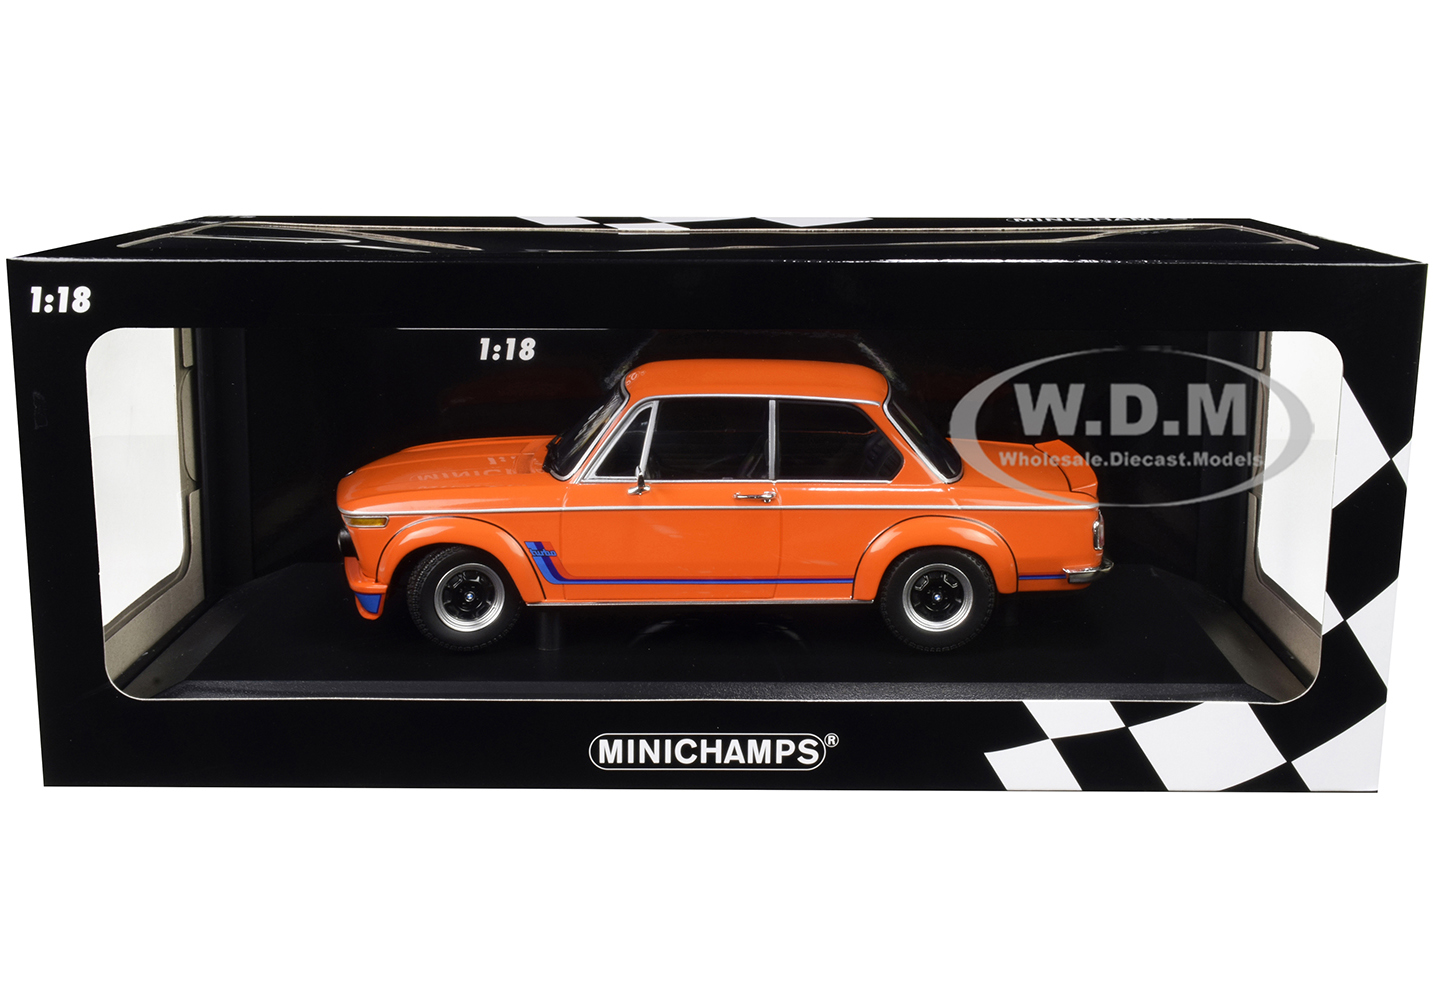 1973 Bmw 2002 Turbo Orange With Stripes Limited Edition To 300 Pieces Worldwide 1/18 Diecast Model Car By Minichamps